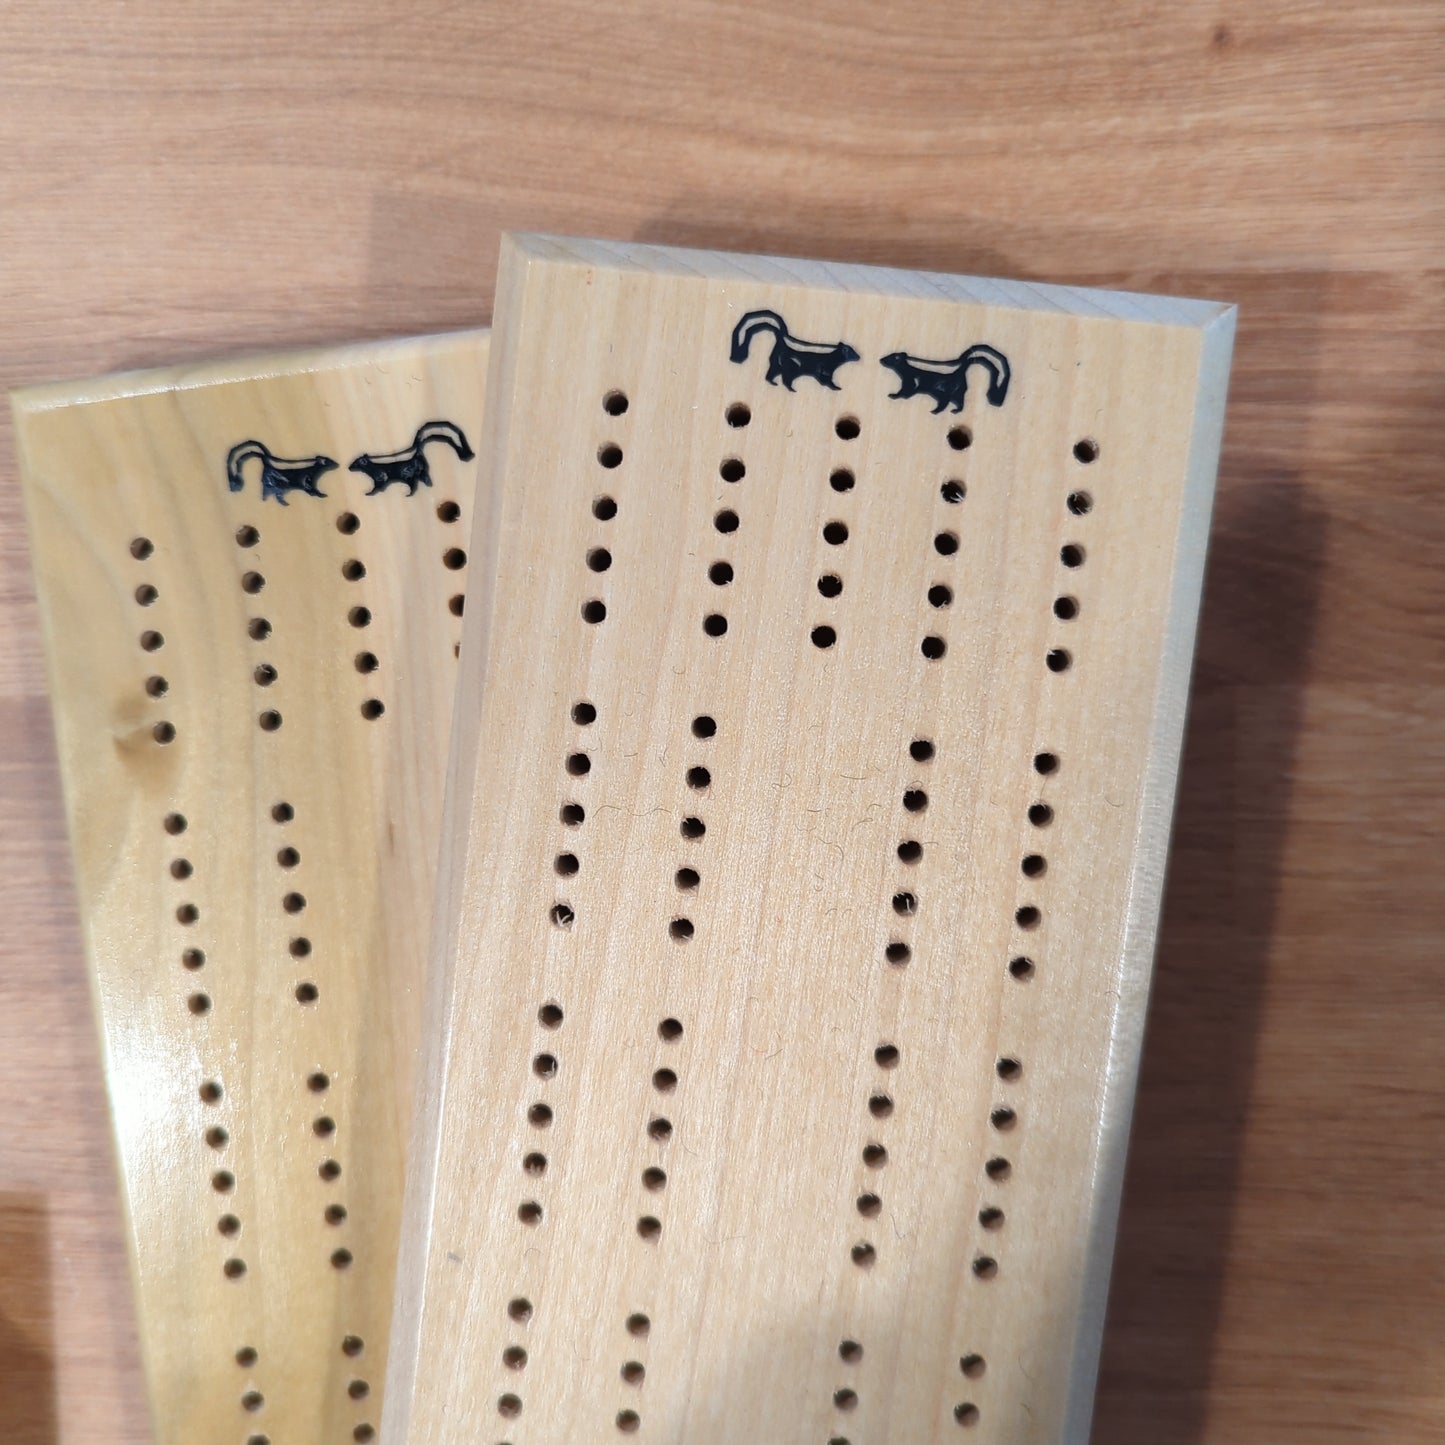 Tournament (lapped) cribbage board